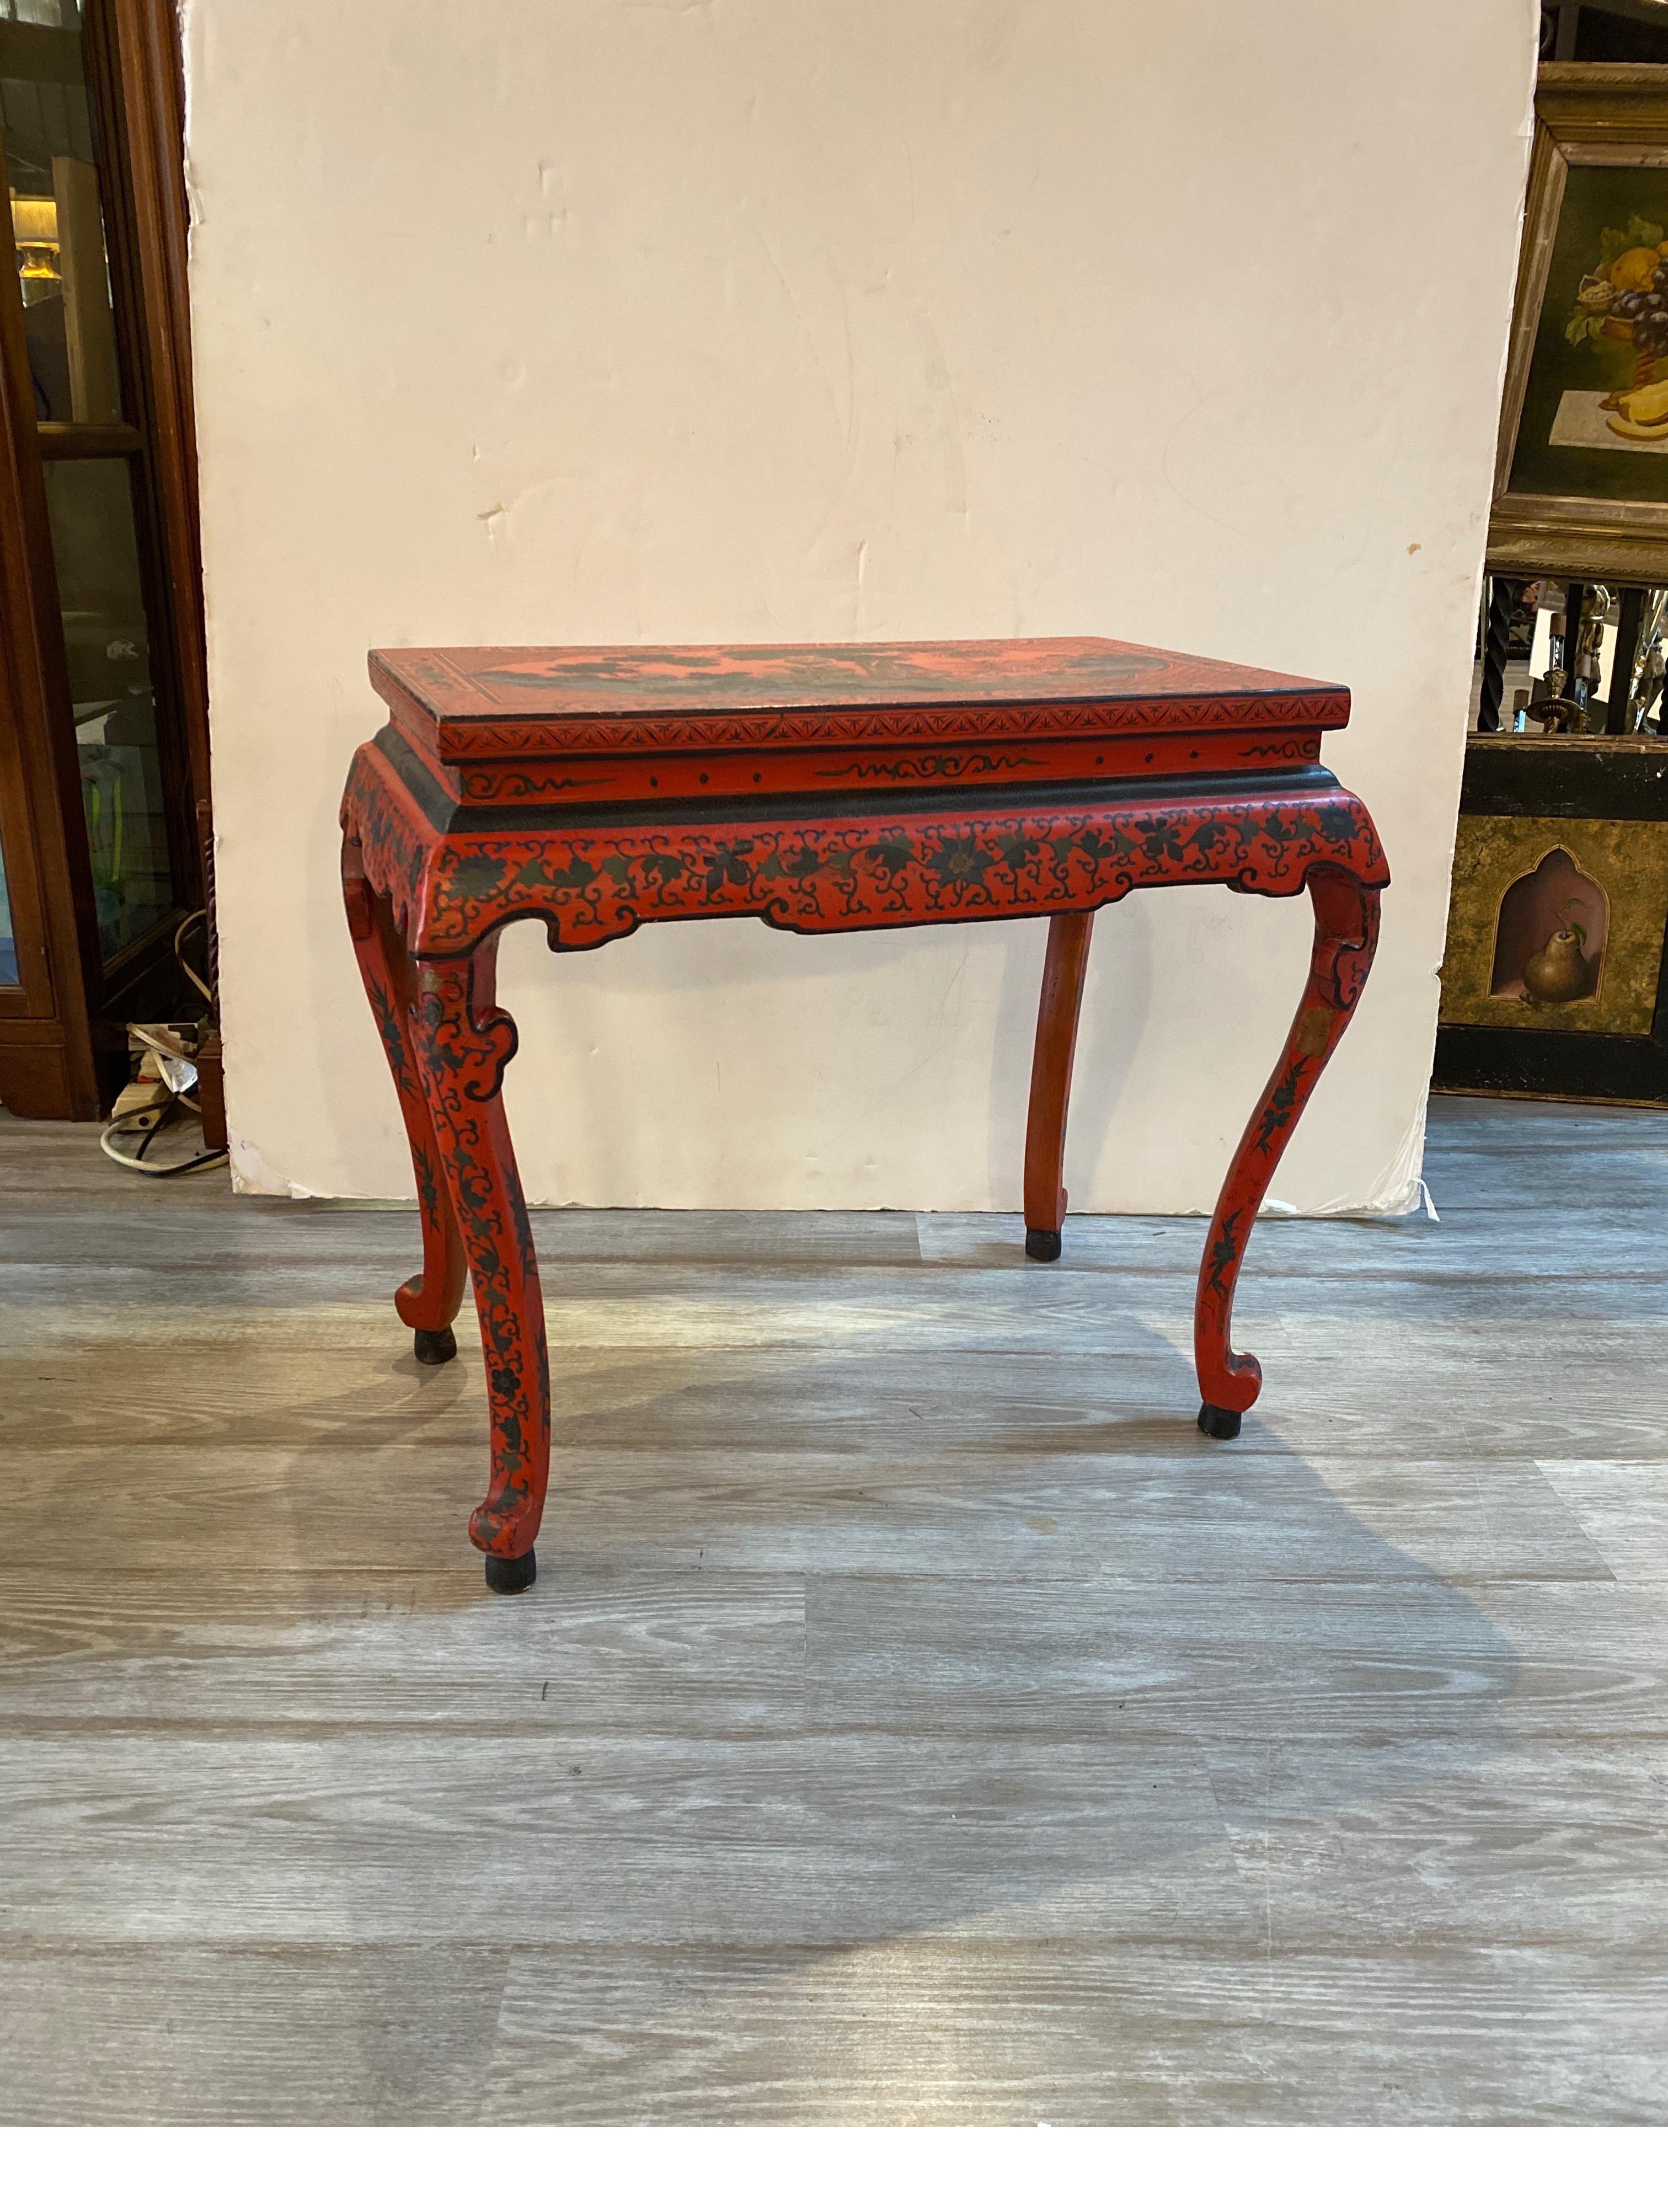 A circa 1920 Chinese red lacquer low tea table with hand painted decoration. The table in very good original condition with slight wear on a few places. 24 inches tall.